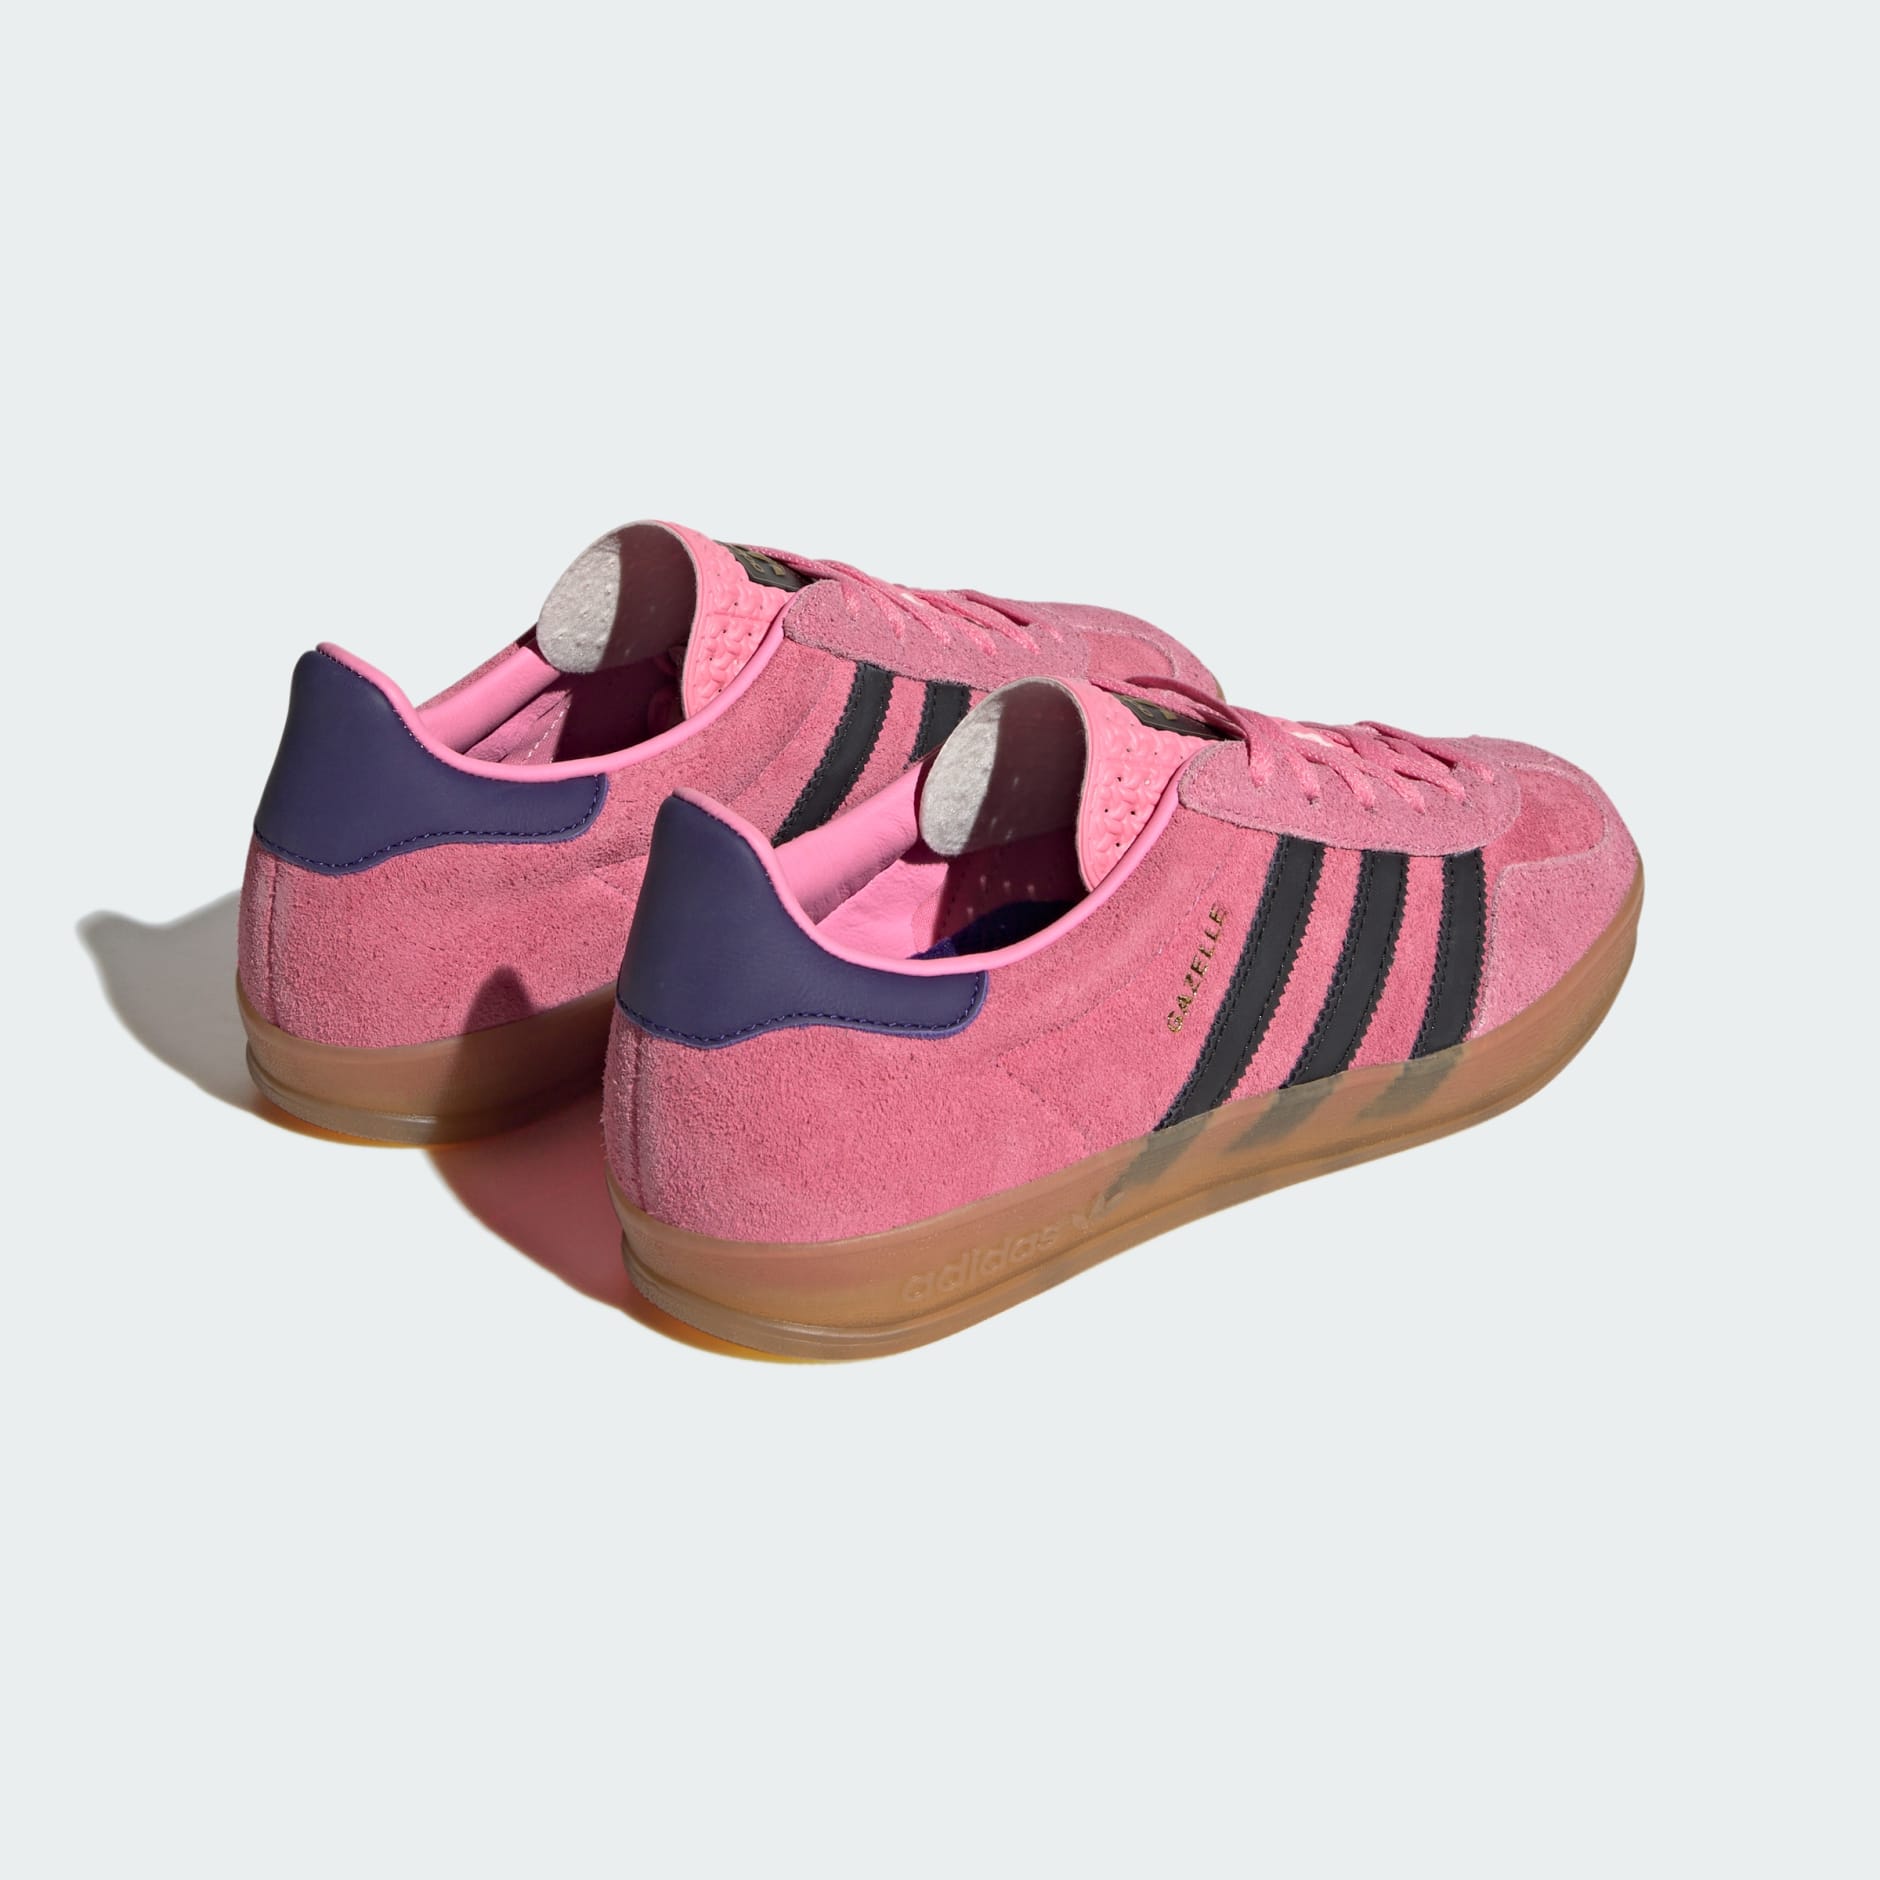 Adidas Gazelle Mens Suede Classic Pink White Low Sneakers Size 9